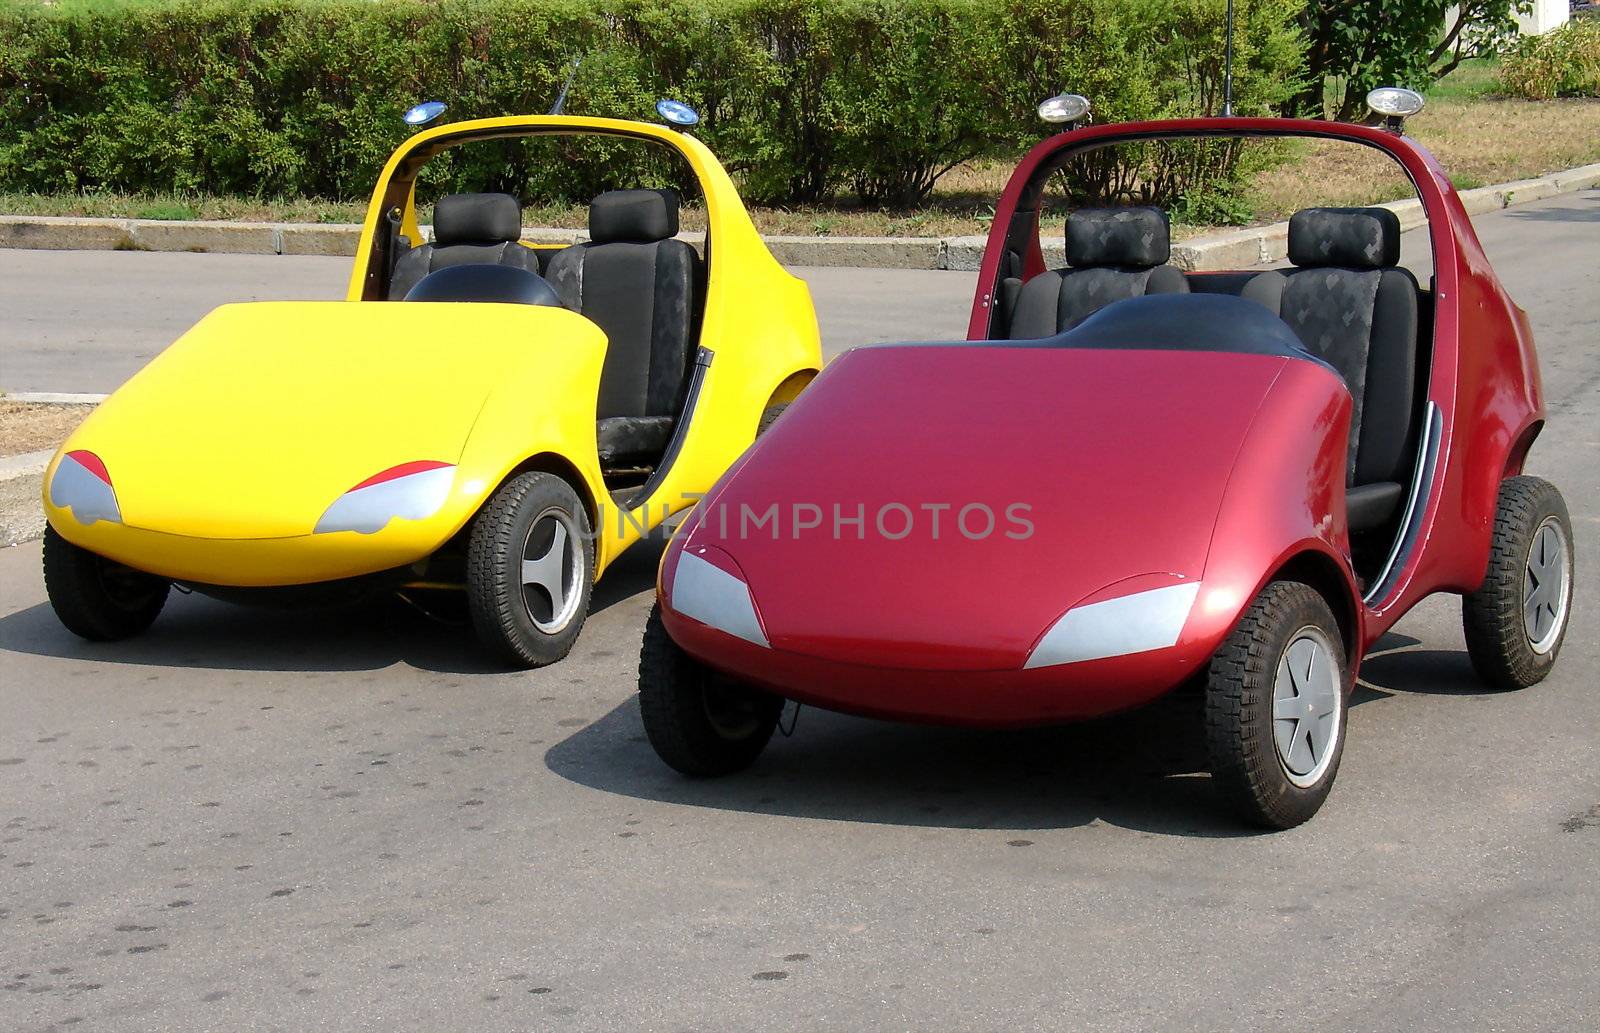 Pair of red and yellow child cars